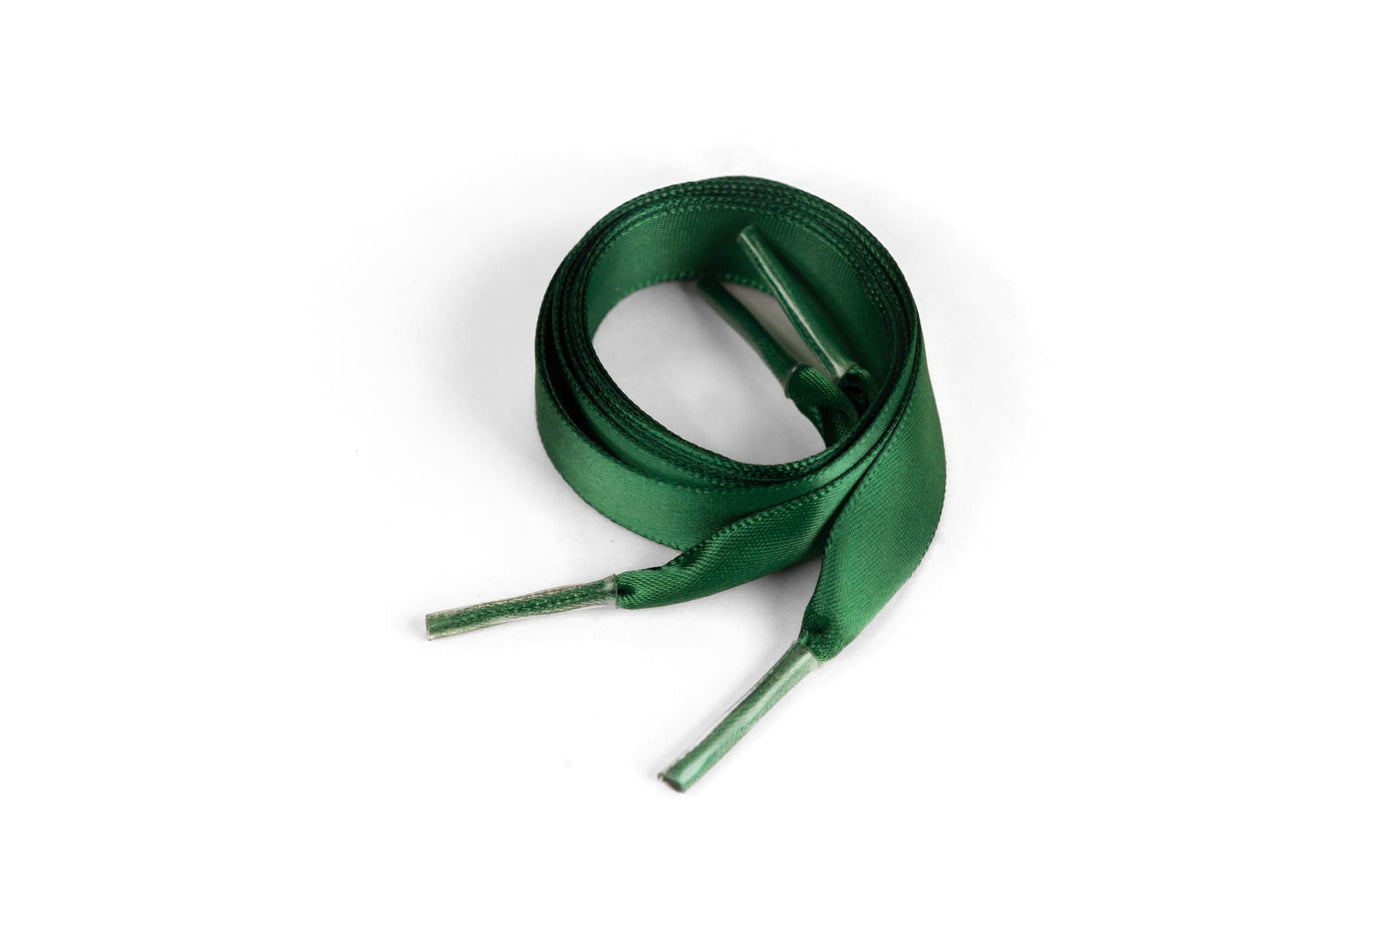 Satin Ribbon 5/8" Premium Quality Shoelaces - 72" Inch Length Forest Green